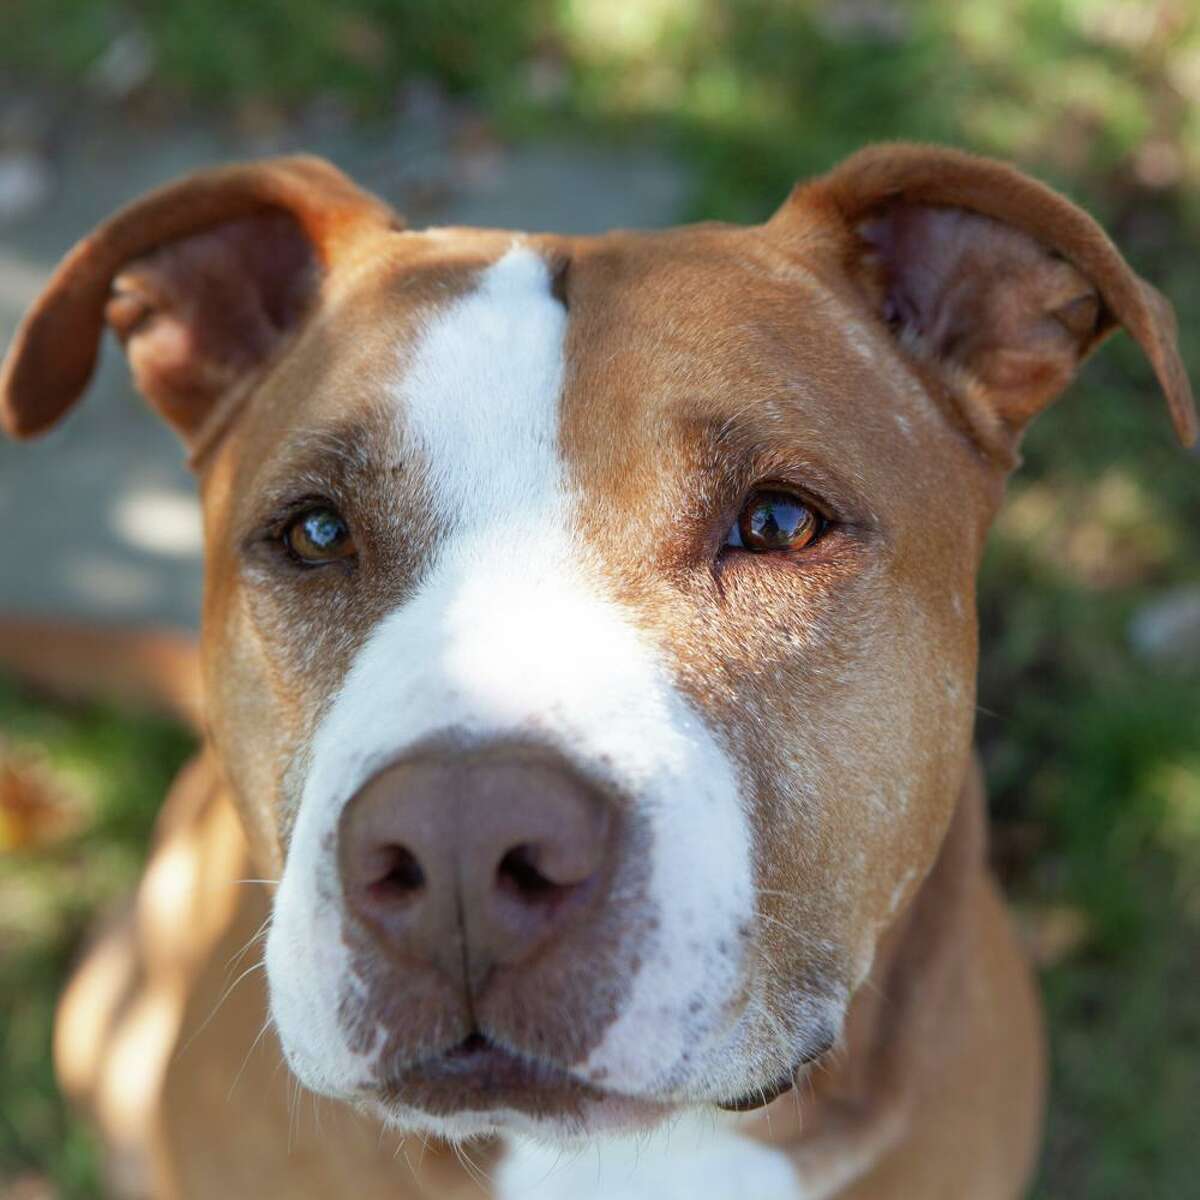 Bruce is a sweet and loyal 5-year old American Staffordshire Terrier mix looking for a forever home.